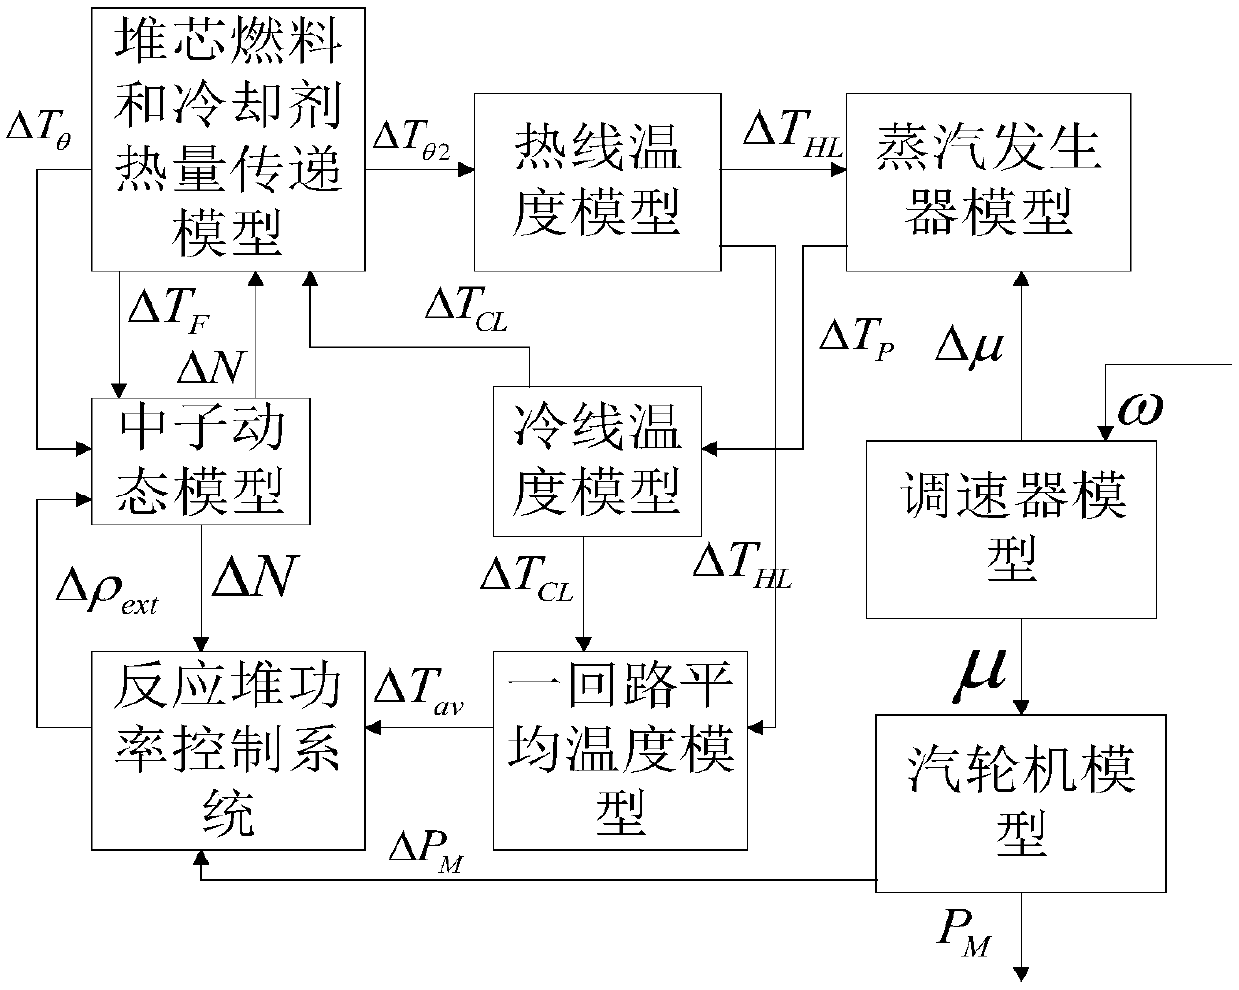 A load rejection protection simulation method for pressurized water reactor nuclear power unit under different power levels